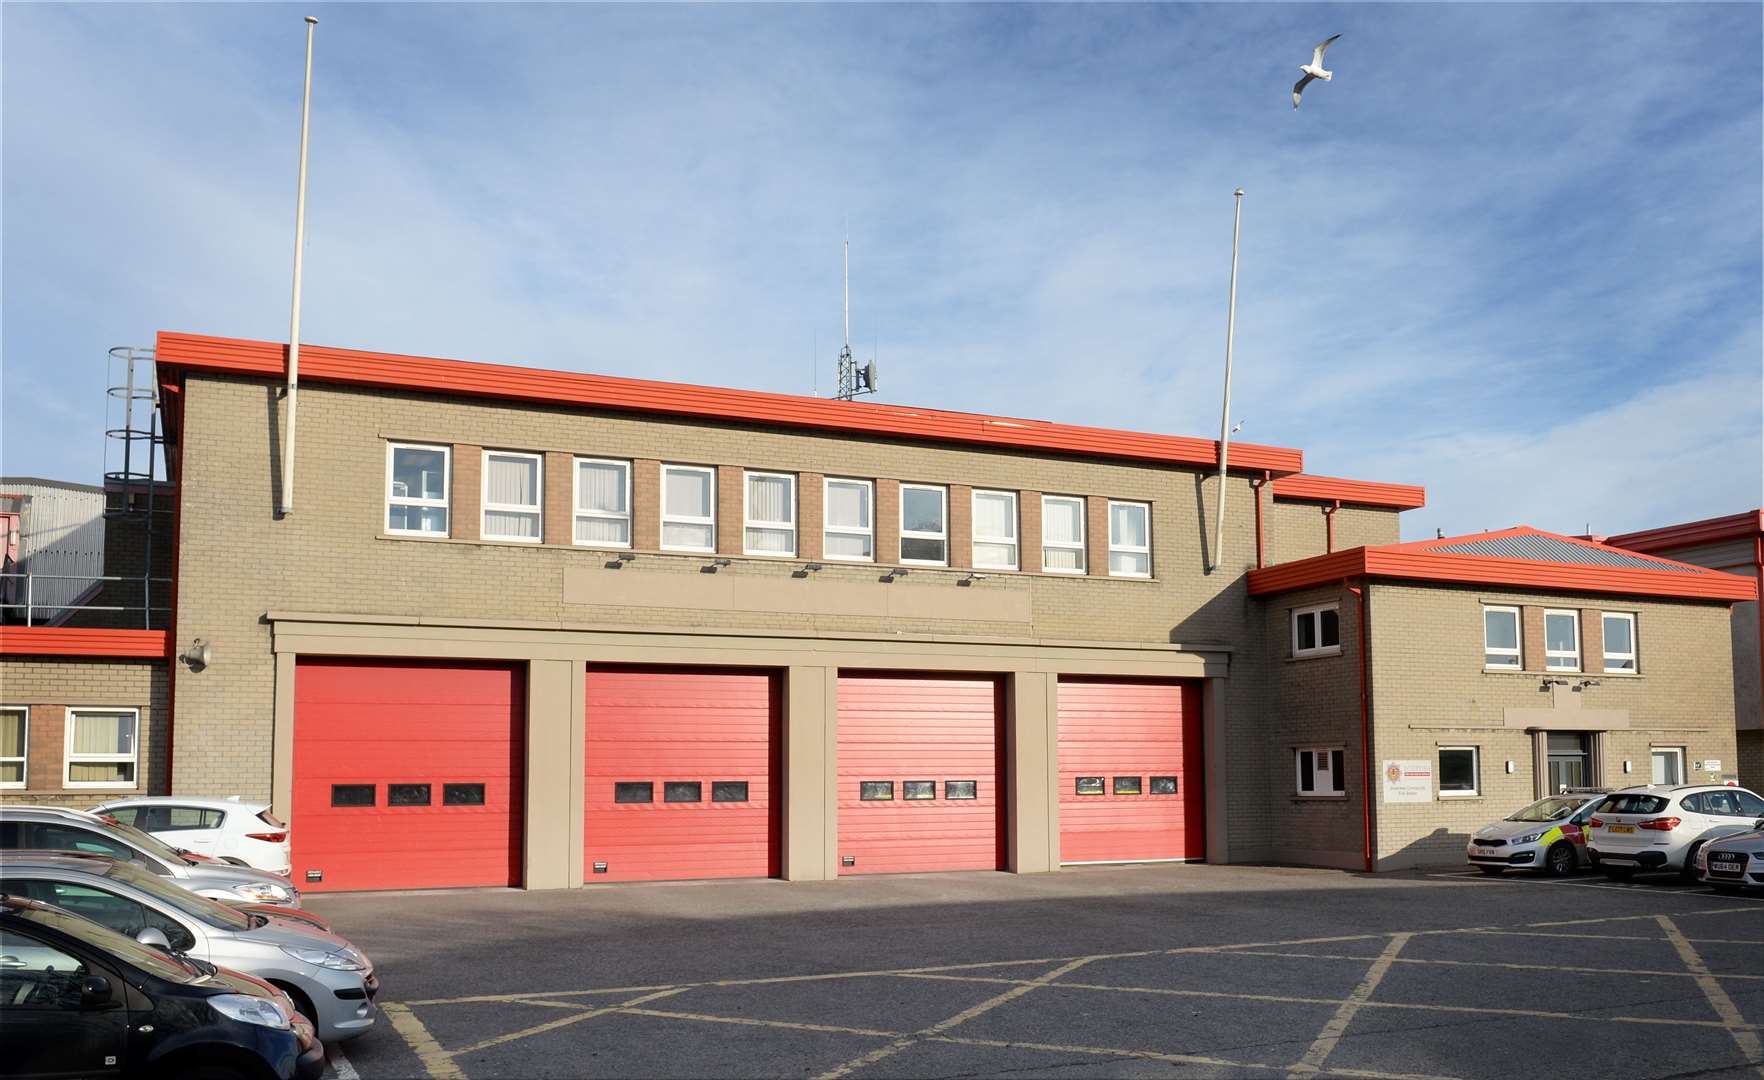 Inverness Fire Station.